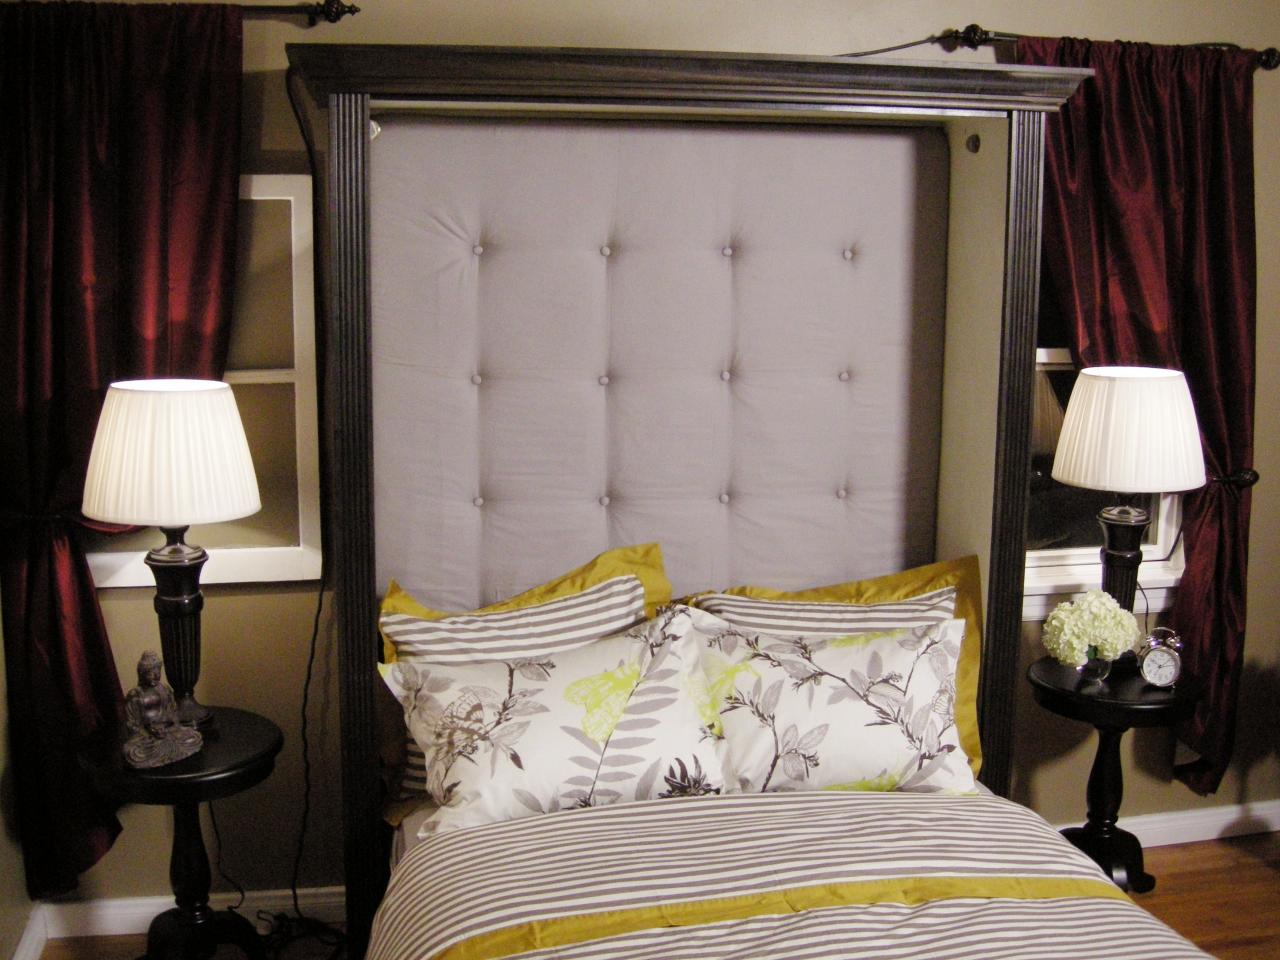 How To Make A Tufted Headboard, Best Way To Attach Headboard Wall Bed Frame